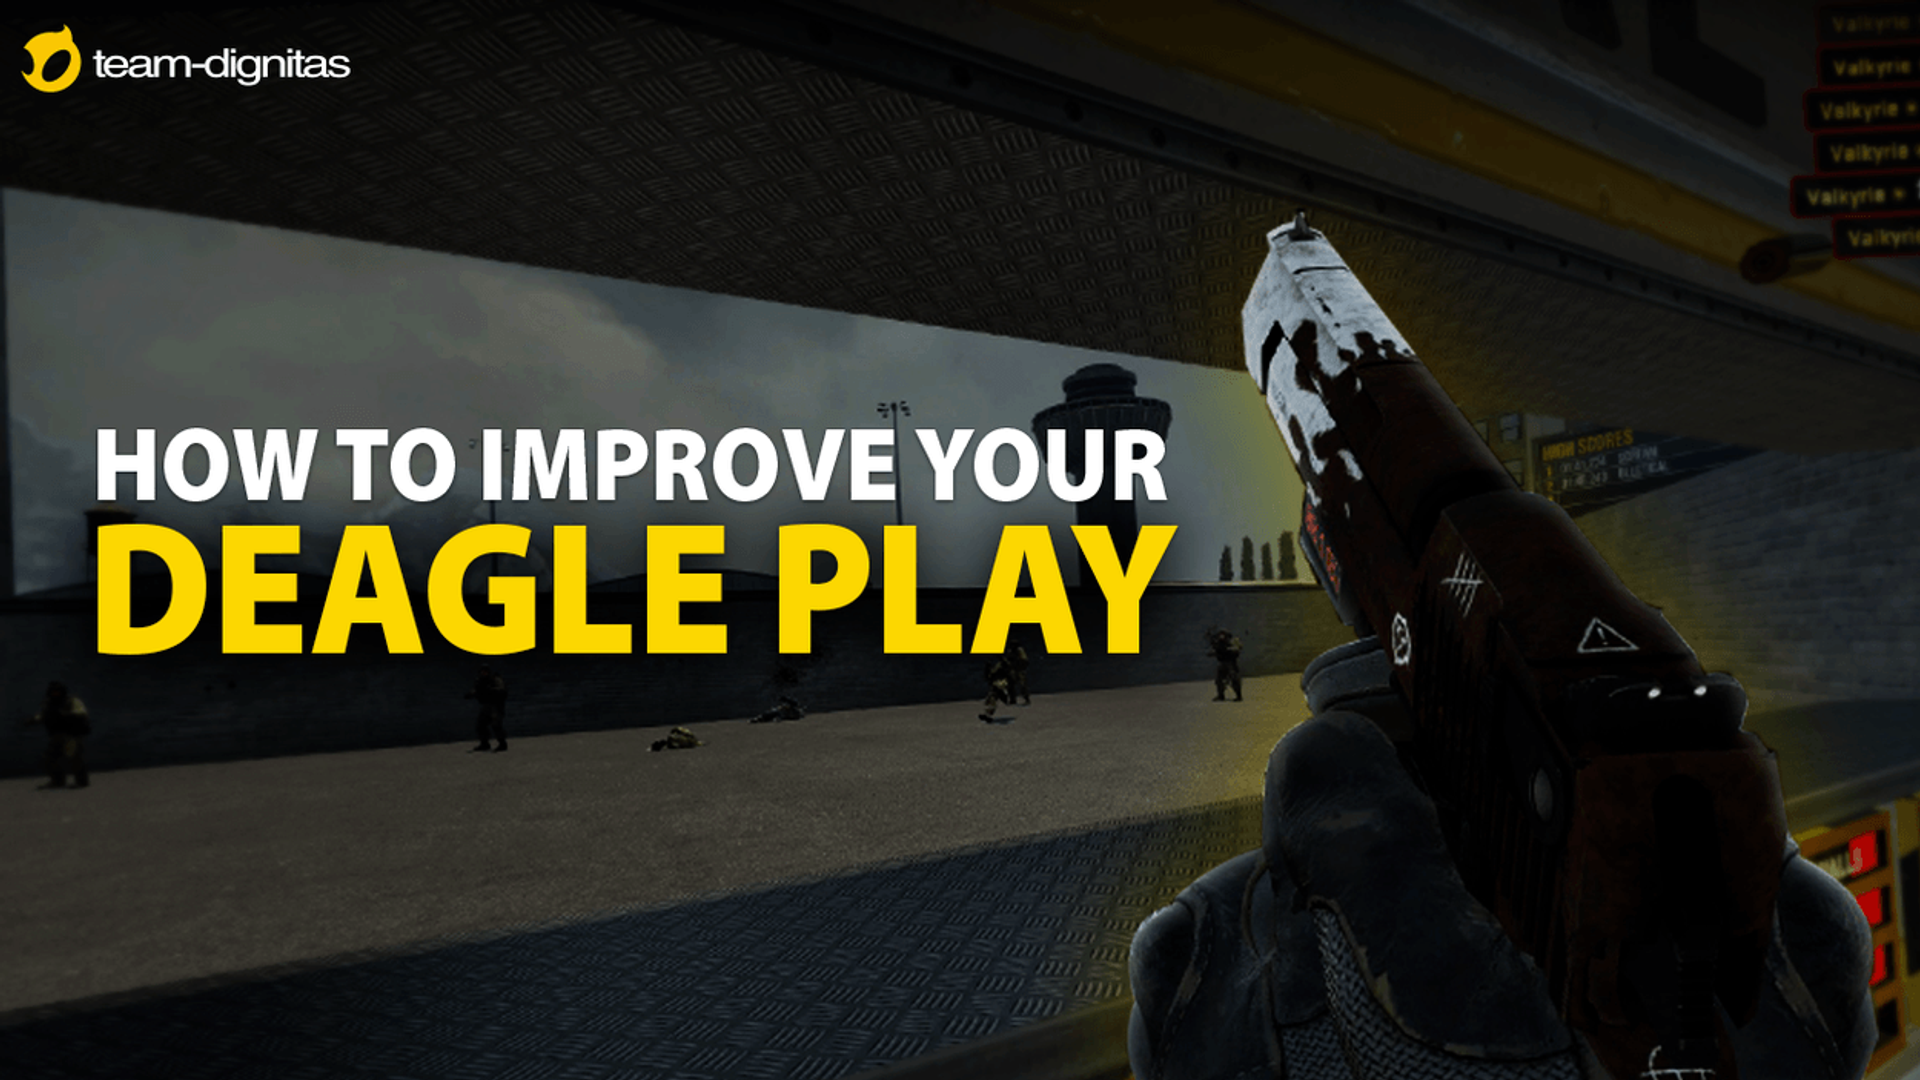 How to INSTANTLY IMPROVE Your SKILL SHOTS Accuracy! - League of Legends 